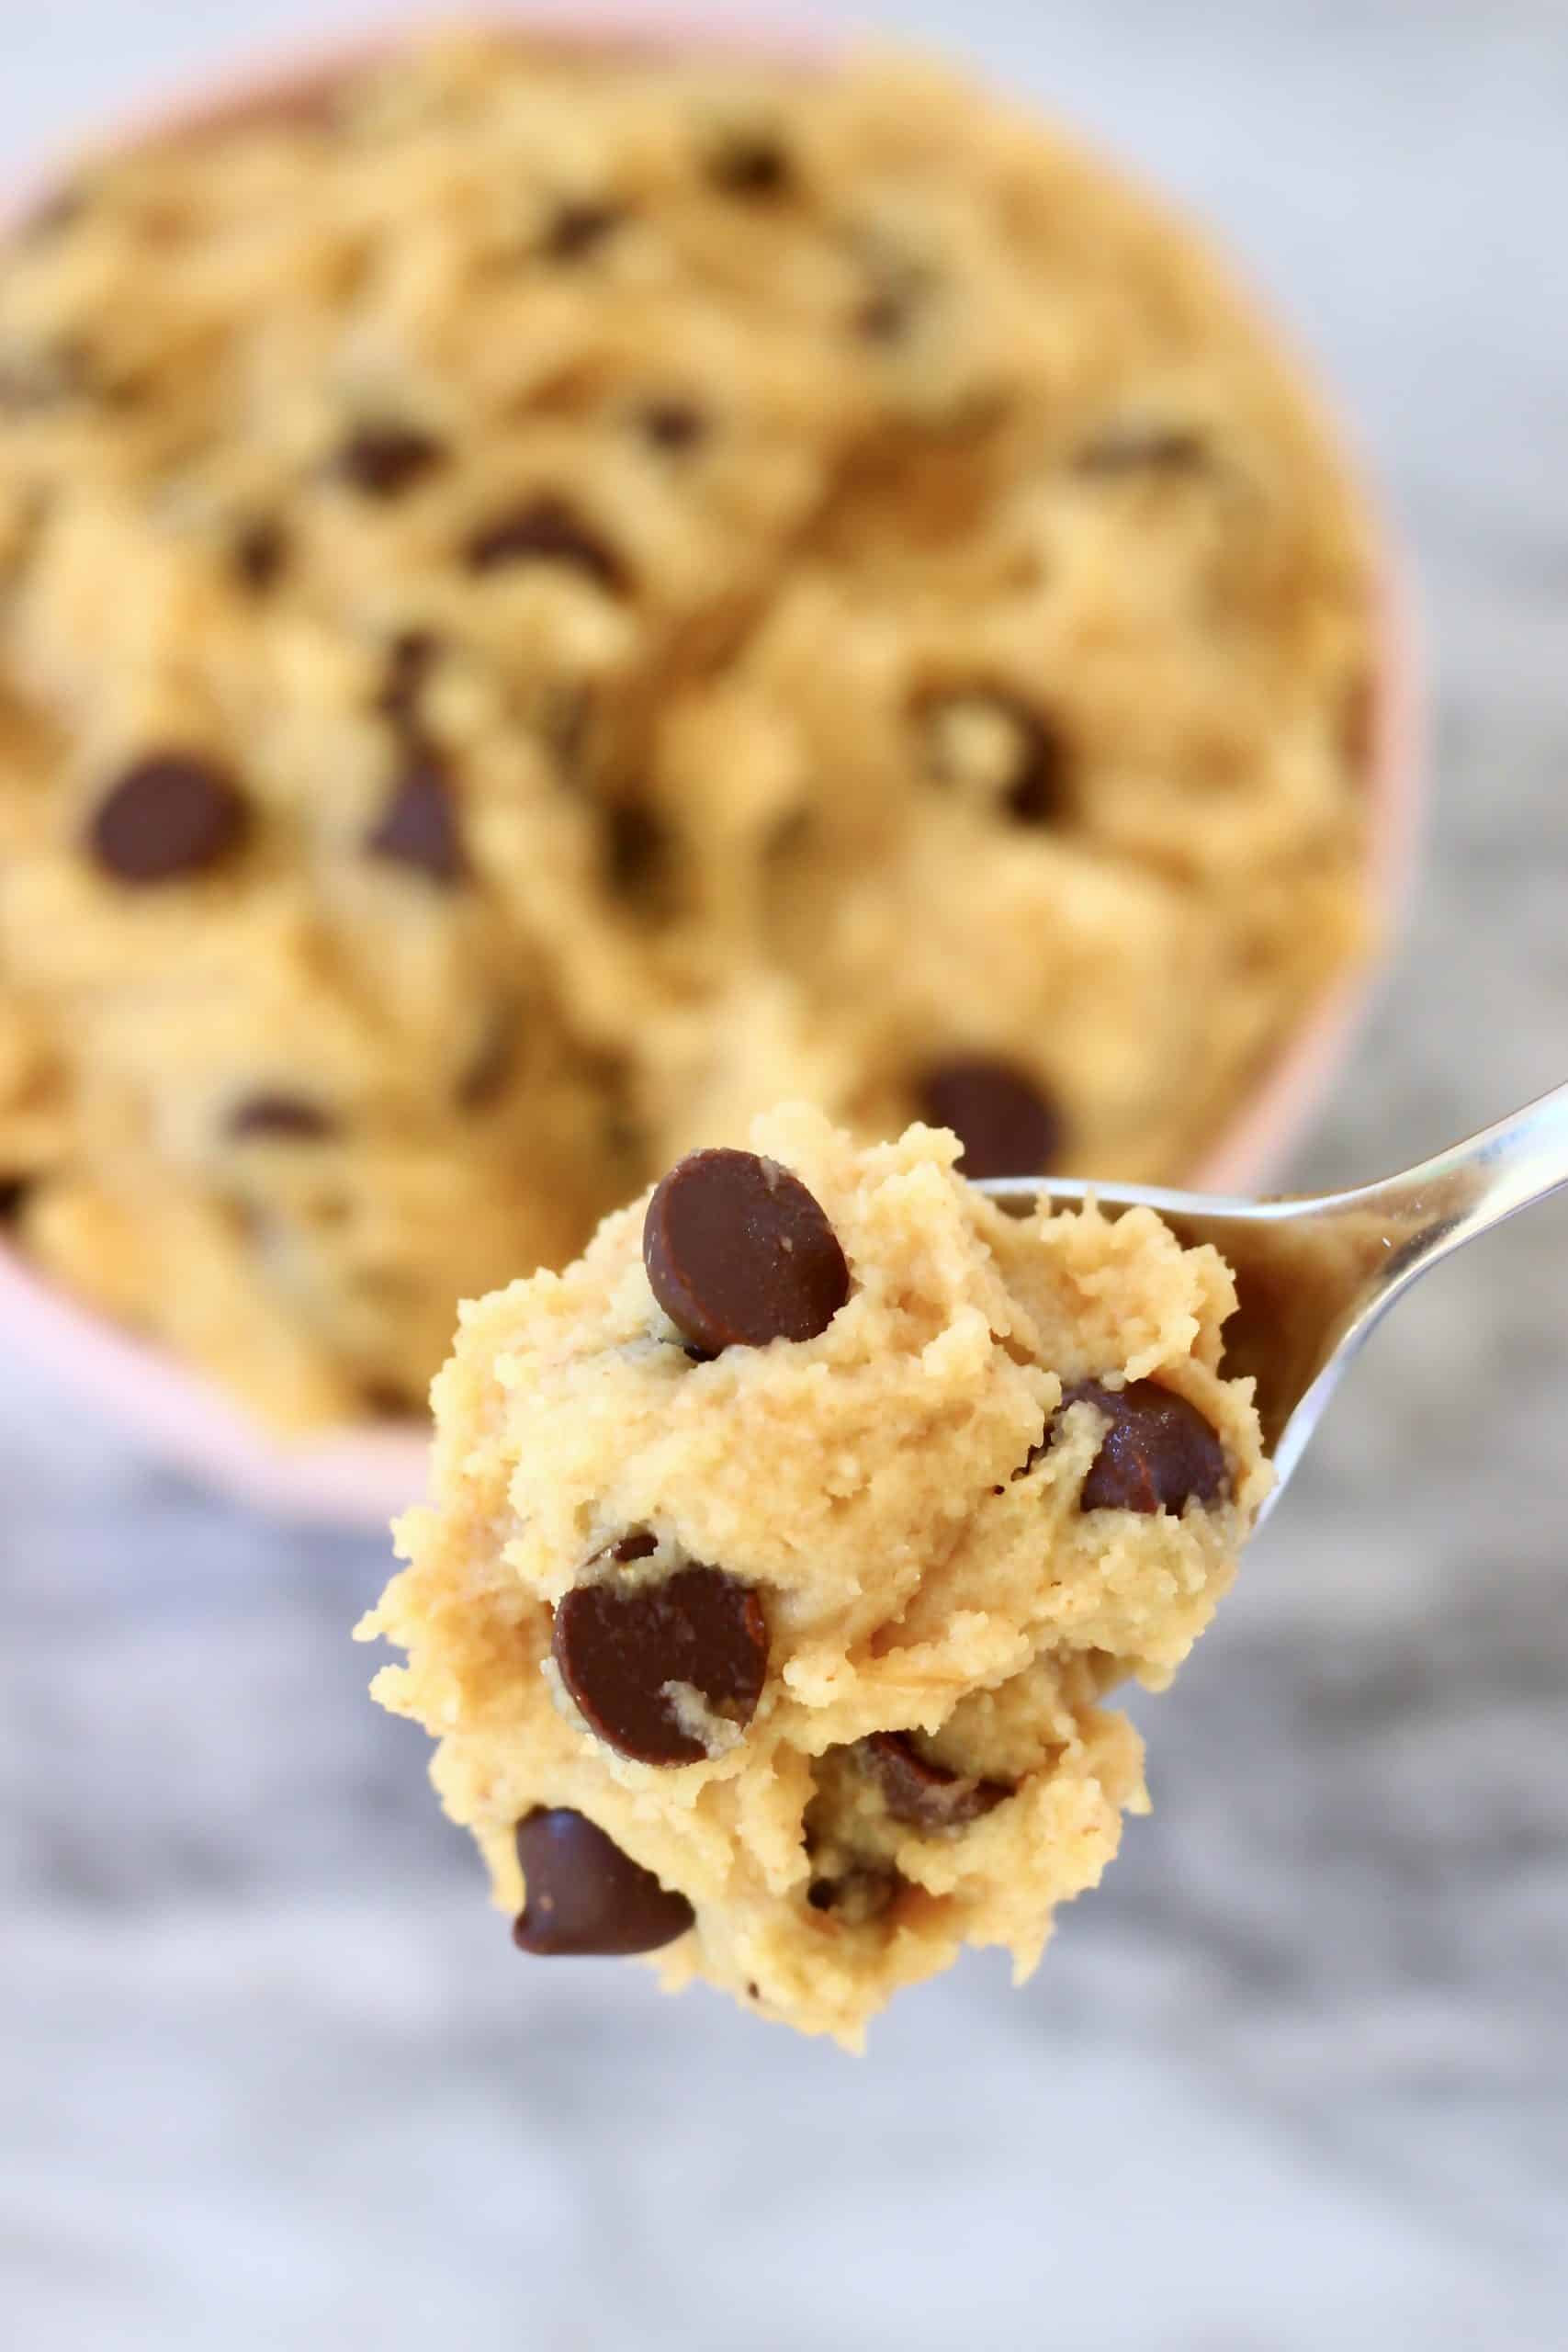 A bowl of no-bake cookie dough with chocolate chips with a spoon lifting up a mouthful